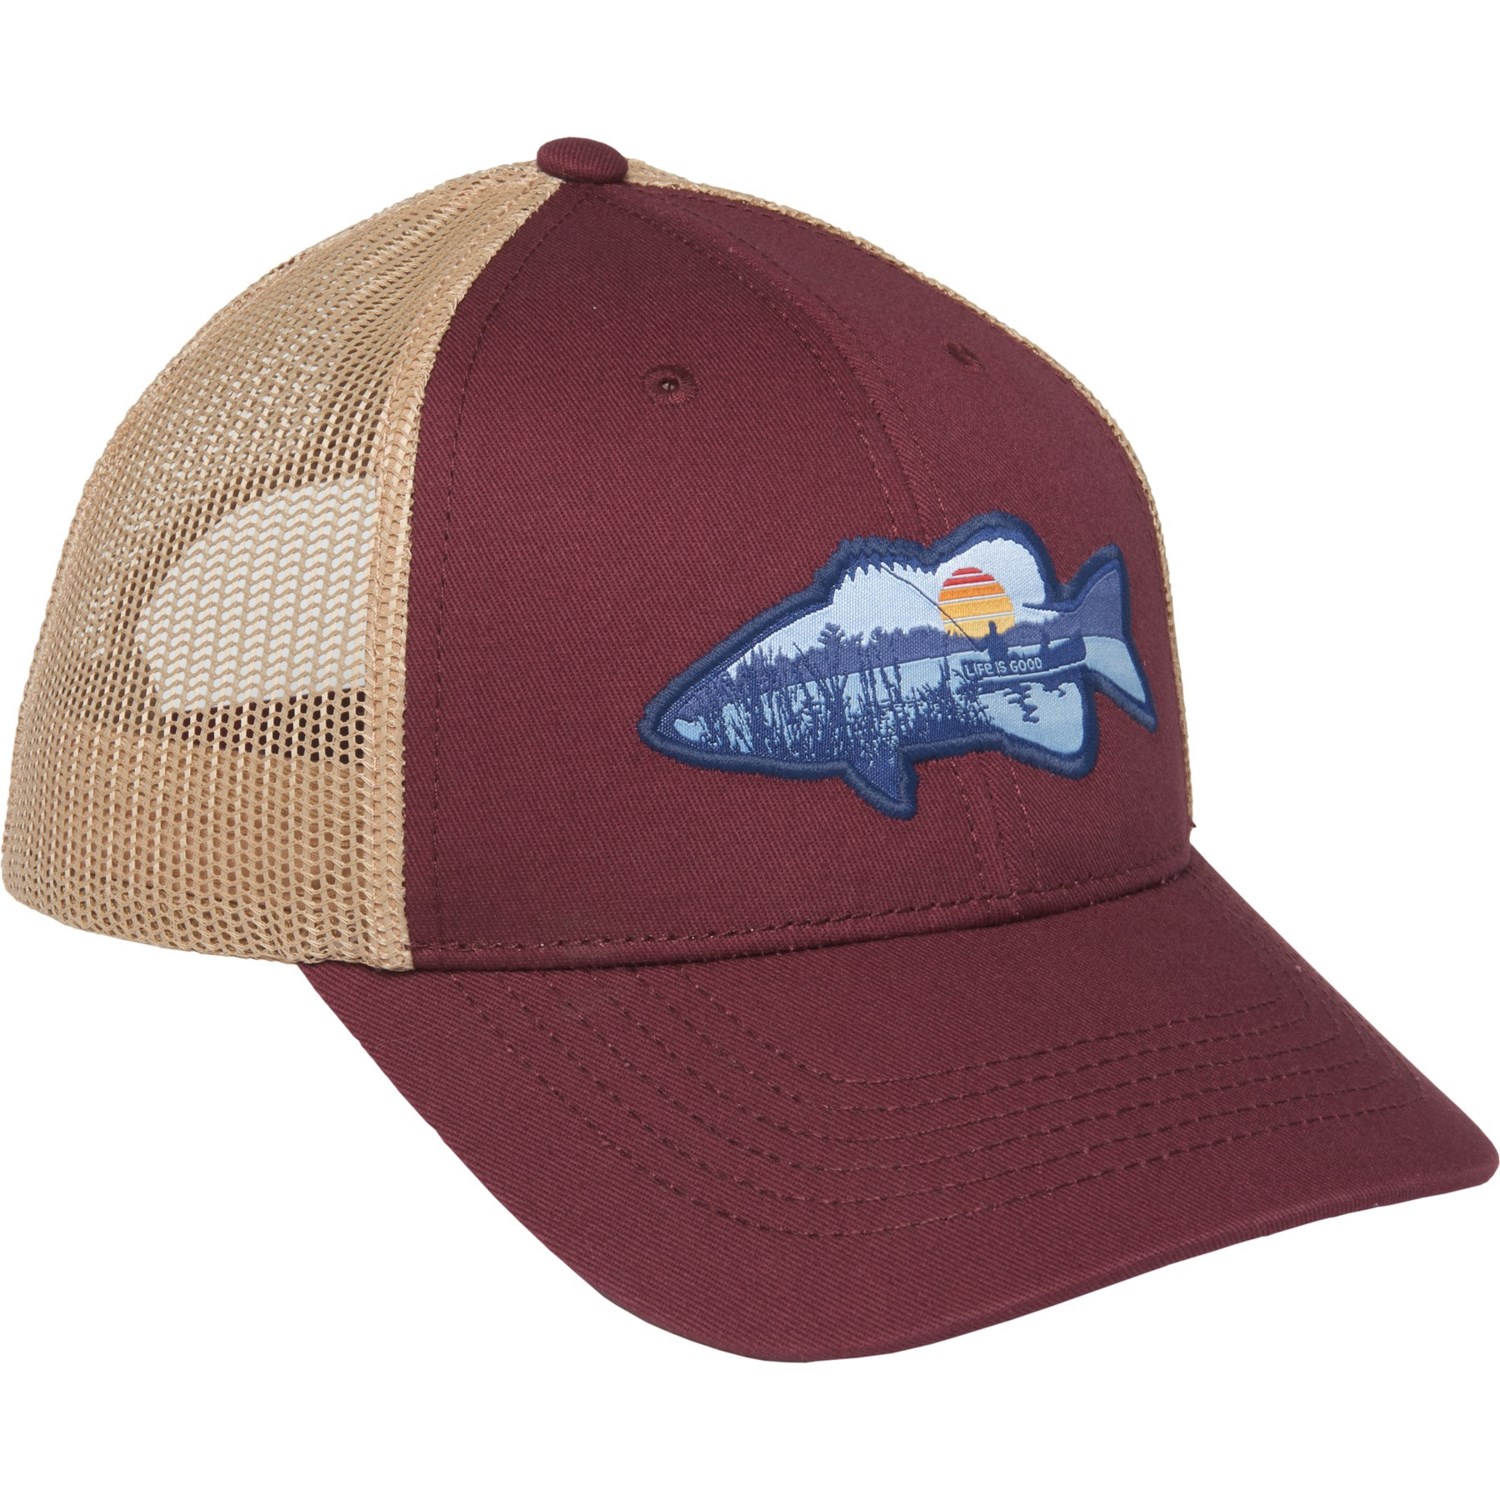 Life Is Good Bass Angler Vista Trucker Hat for Men | Mahogany Brown | Breathable Fabric